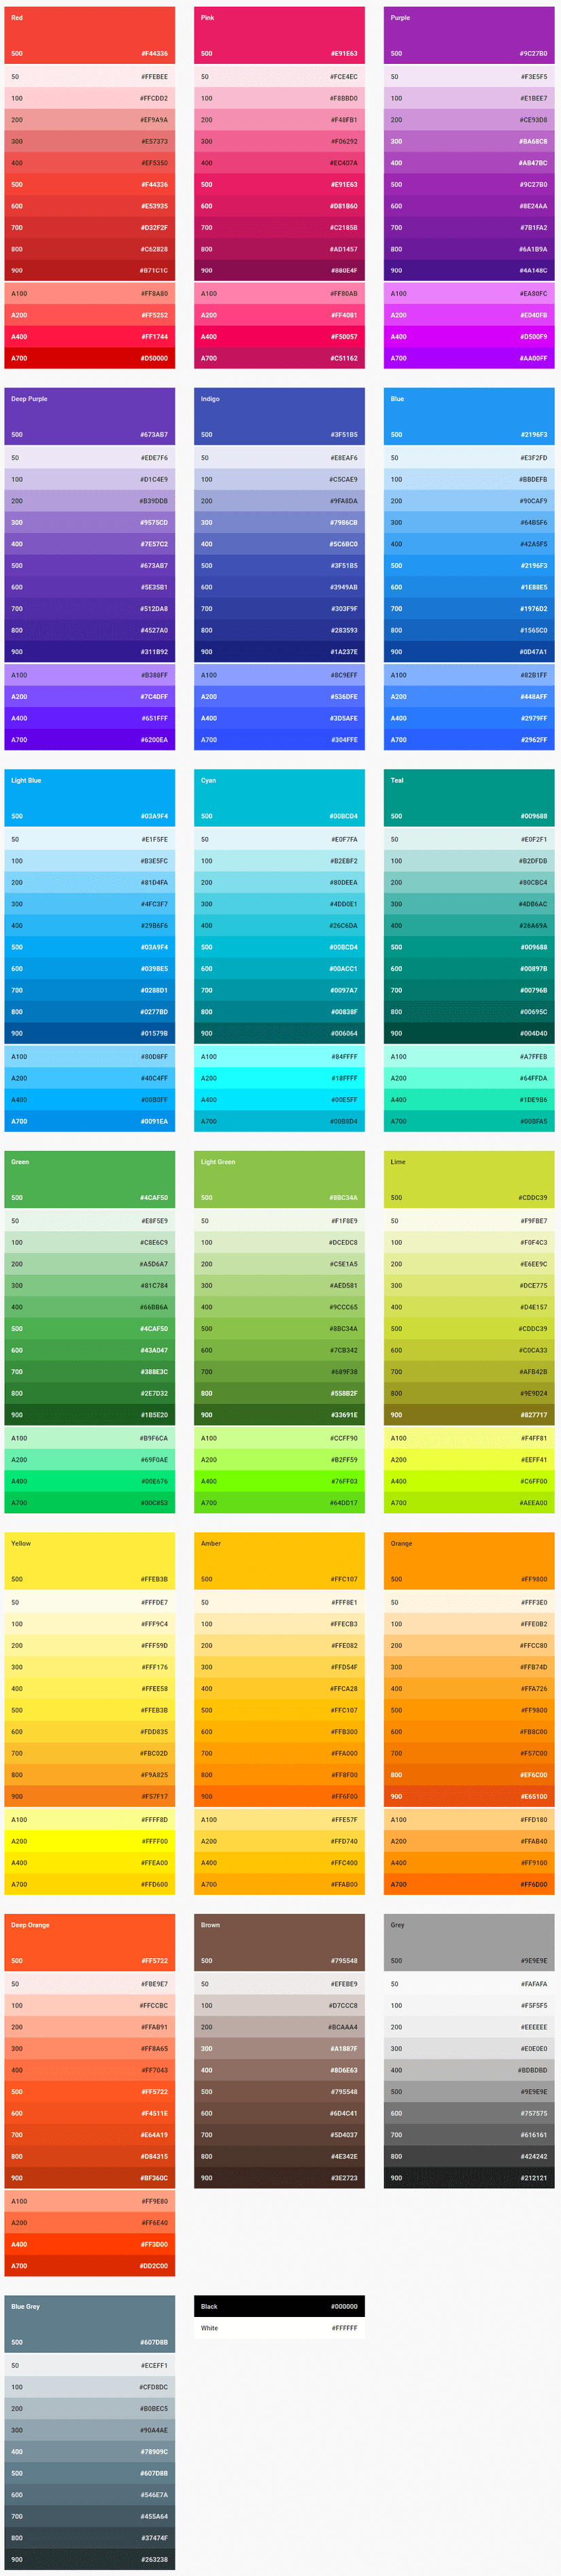 Color-Style-Google-design-guidelines-3.png